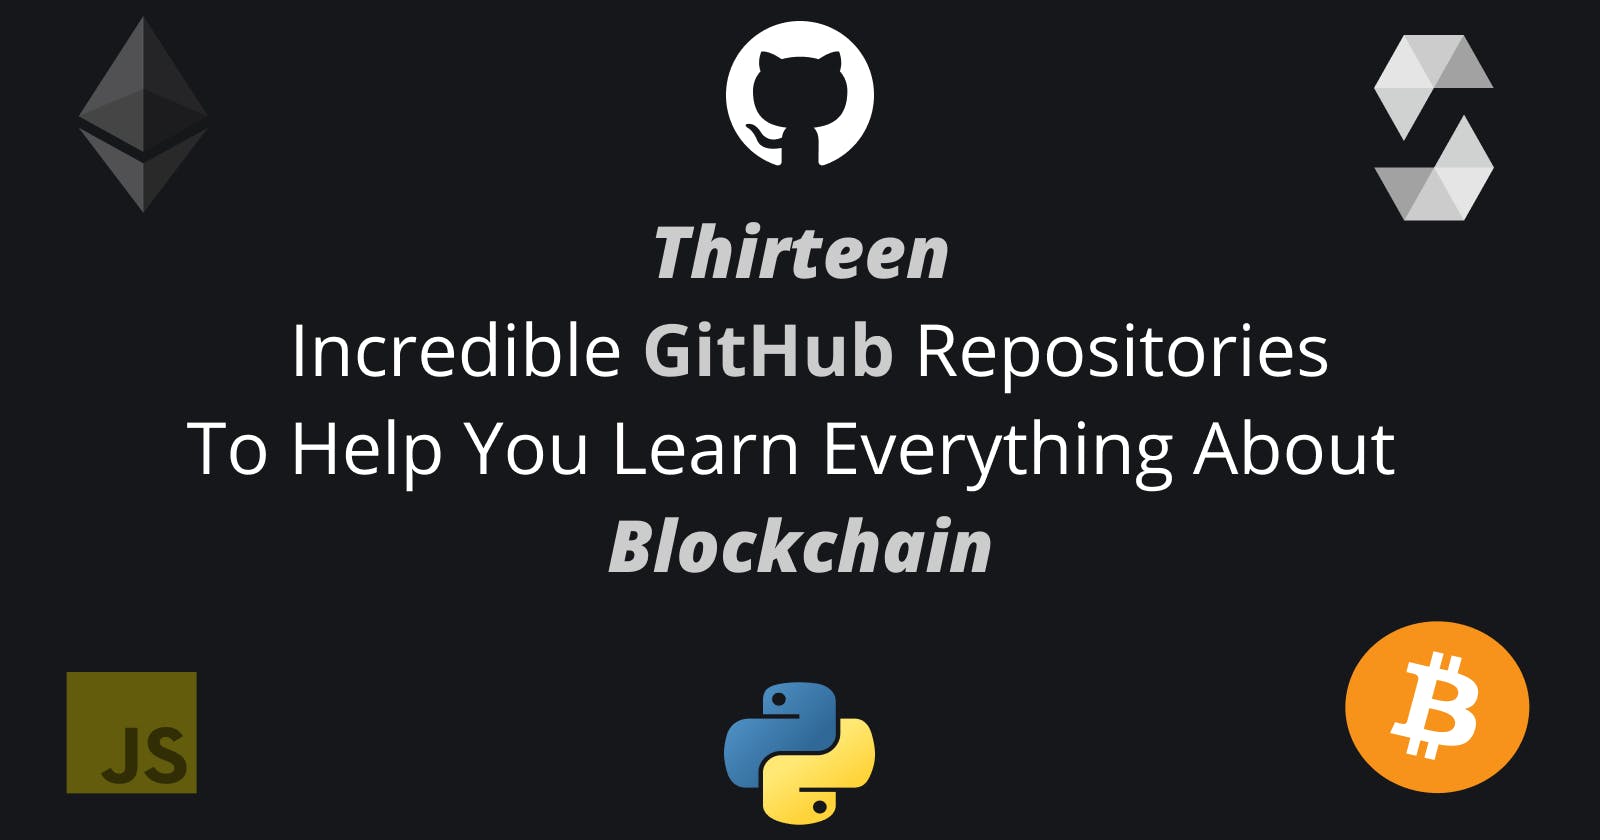 Thirteen Incredible GitHub Repositories To Leverage Your Blockchain Learning